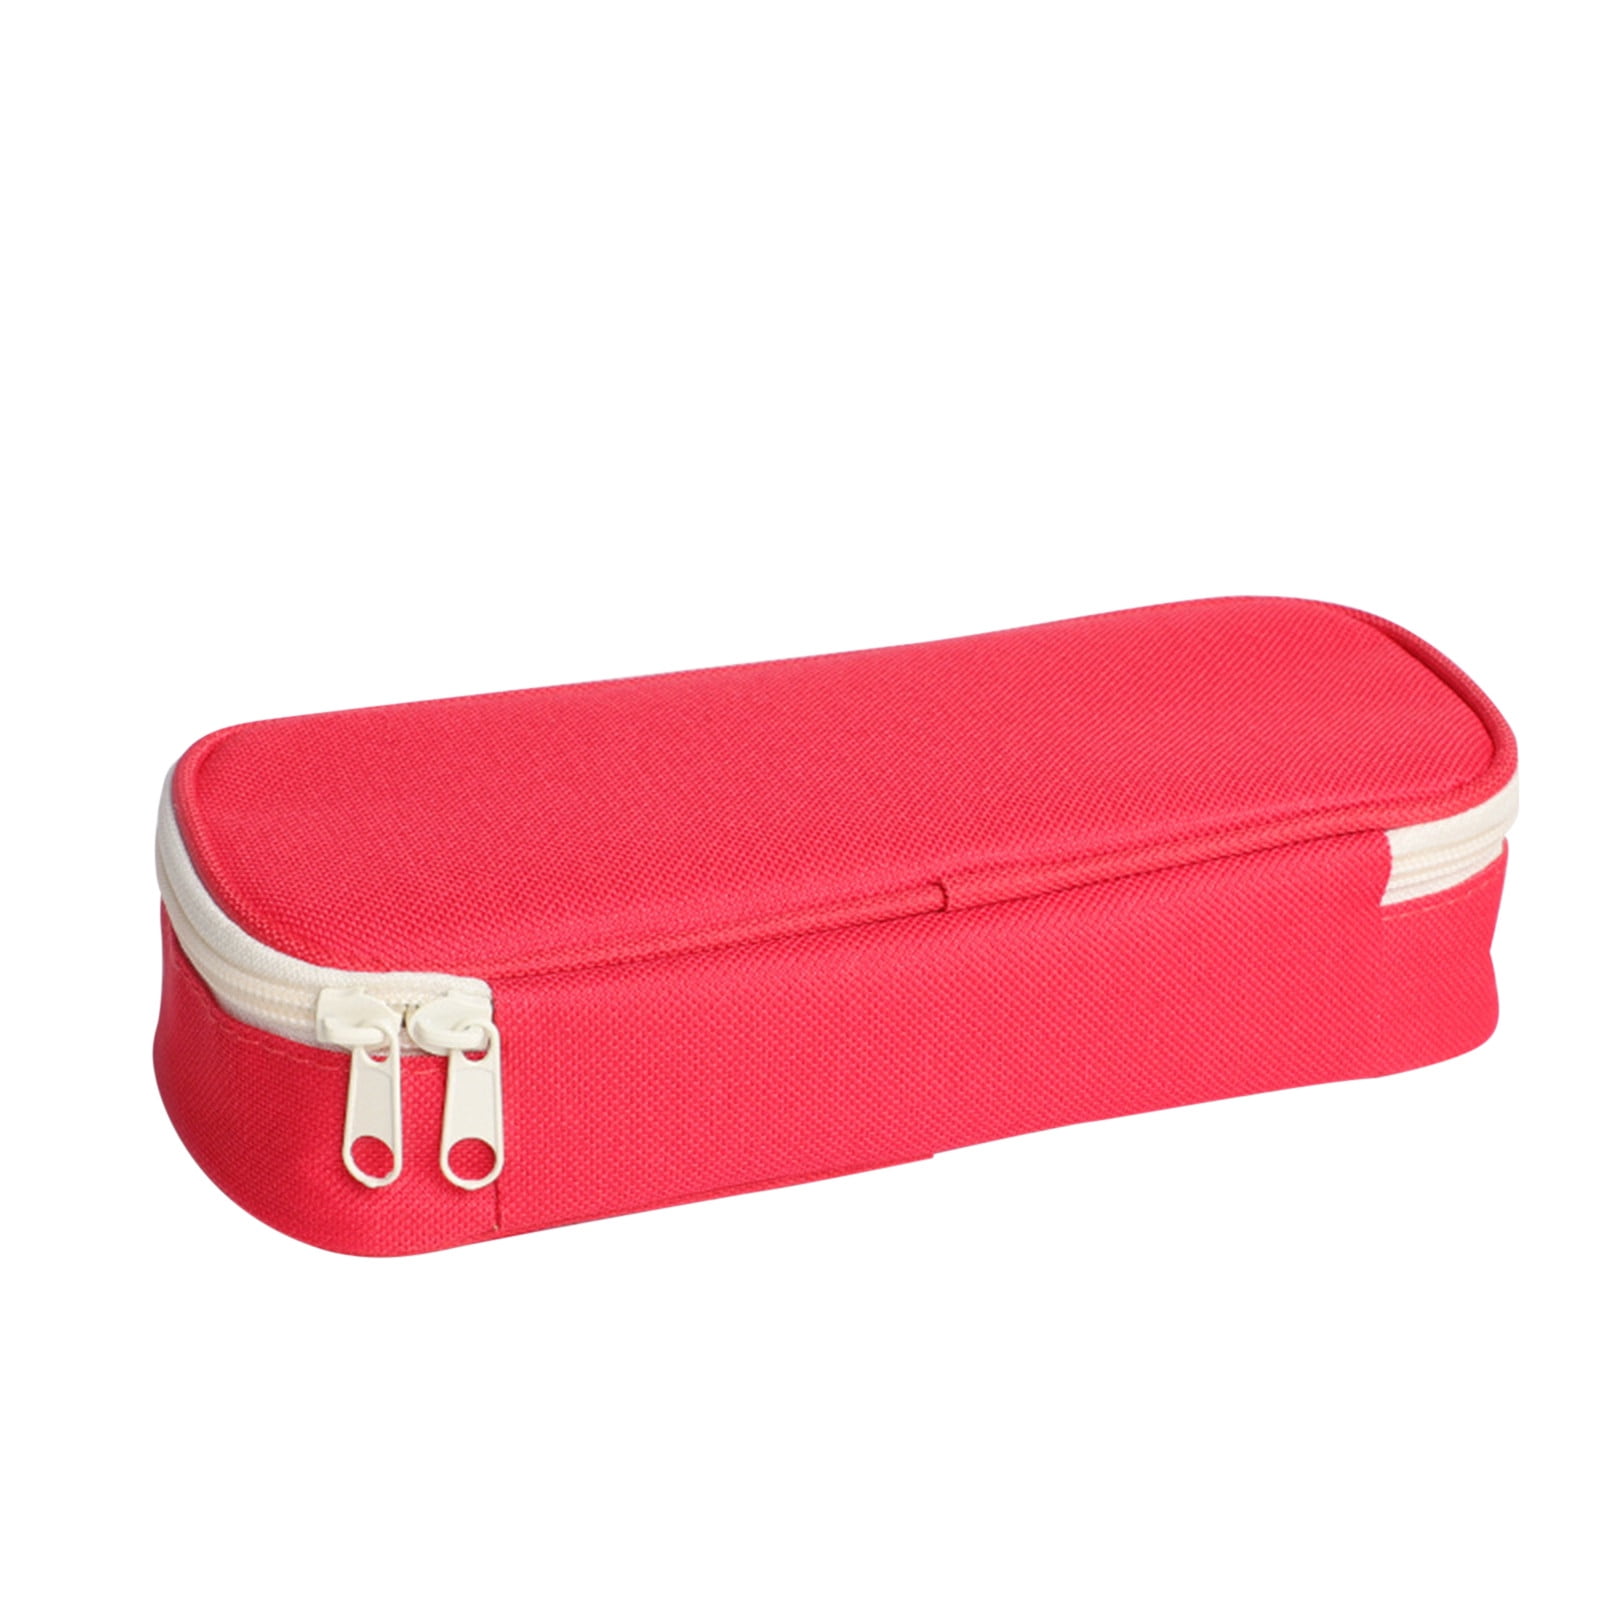 COFEST Long Polka Candy Colored Pencil Case Creative Canvas Pencil Case  Cute Pencil Case Small Slim Pencil Case Slim Polka Dot Pencil Pouches  Orange 